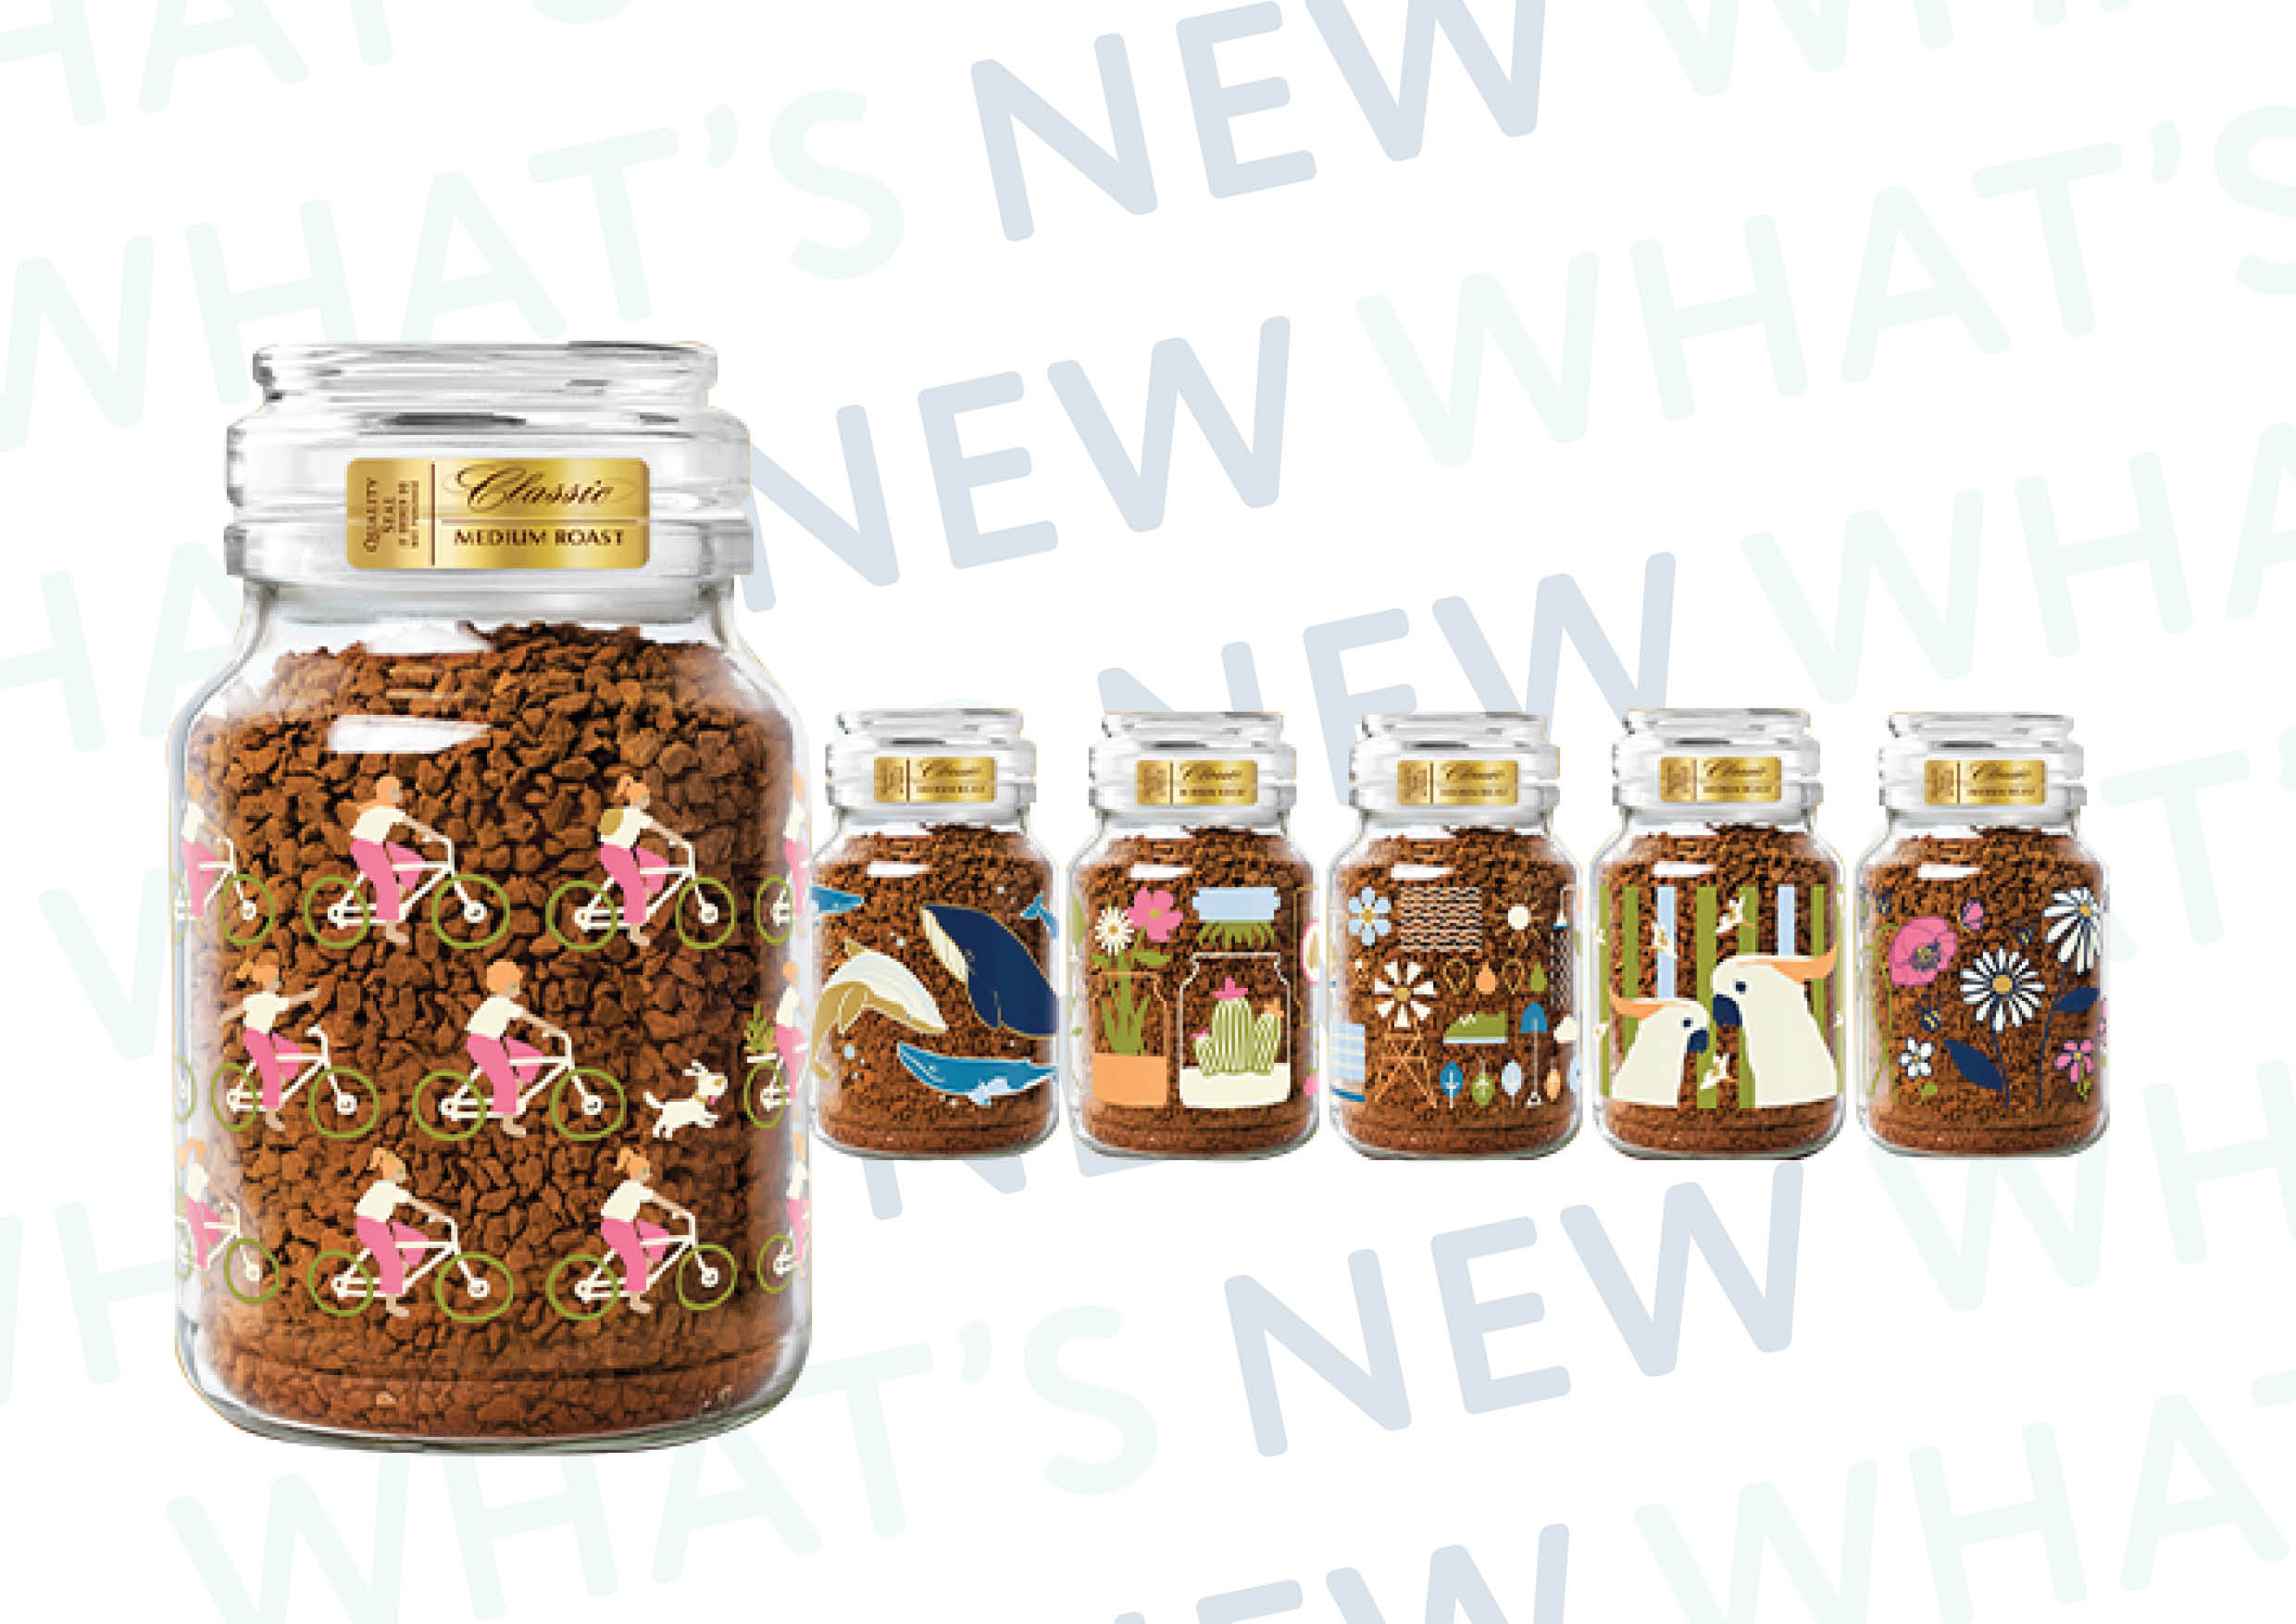 The 2022 limited edition jar collection for Maccona hopes to make a difference. The sustainability campaign aims for a better future and selected six winning designs.